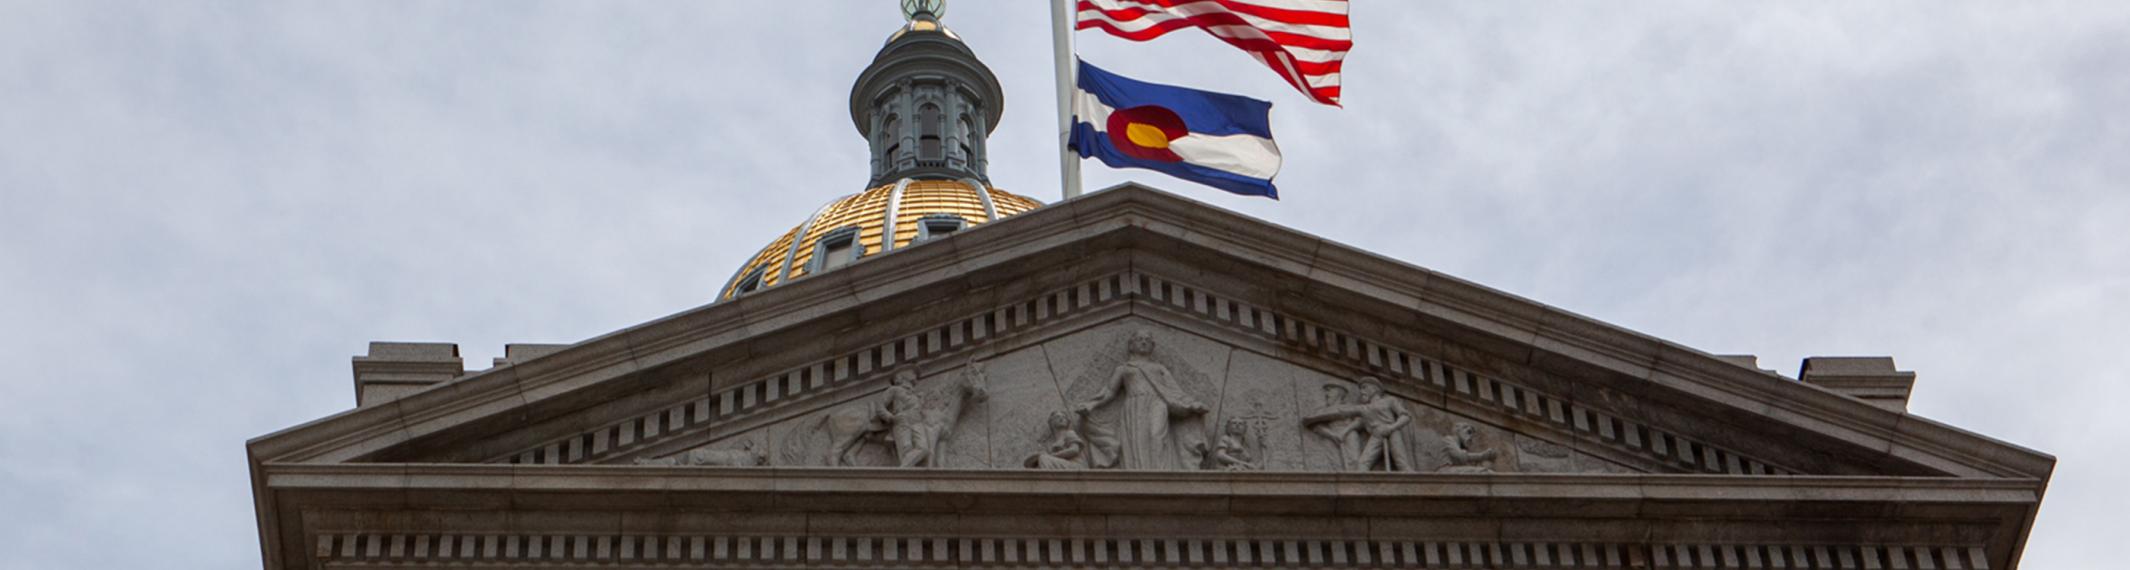 Front of the Colorado State Capitol with U.S. and Colorado flags blowing in the wind